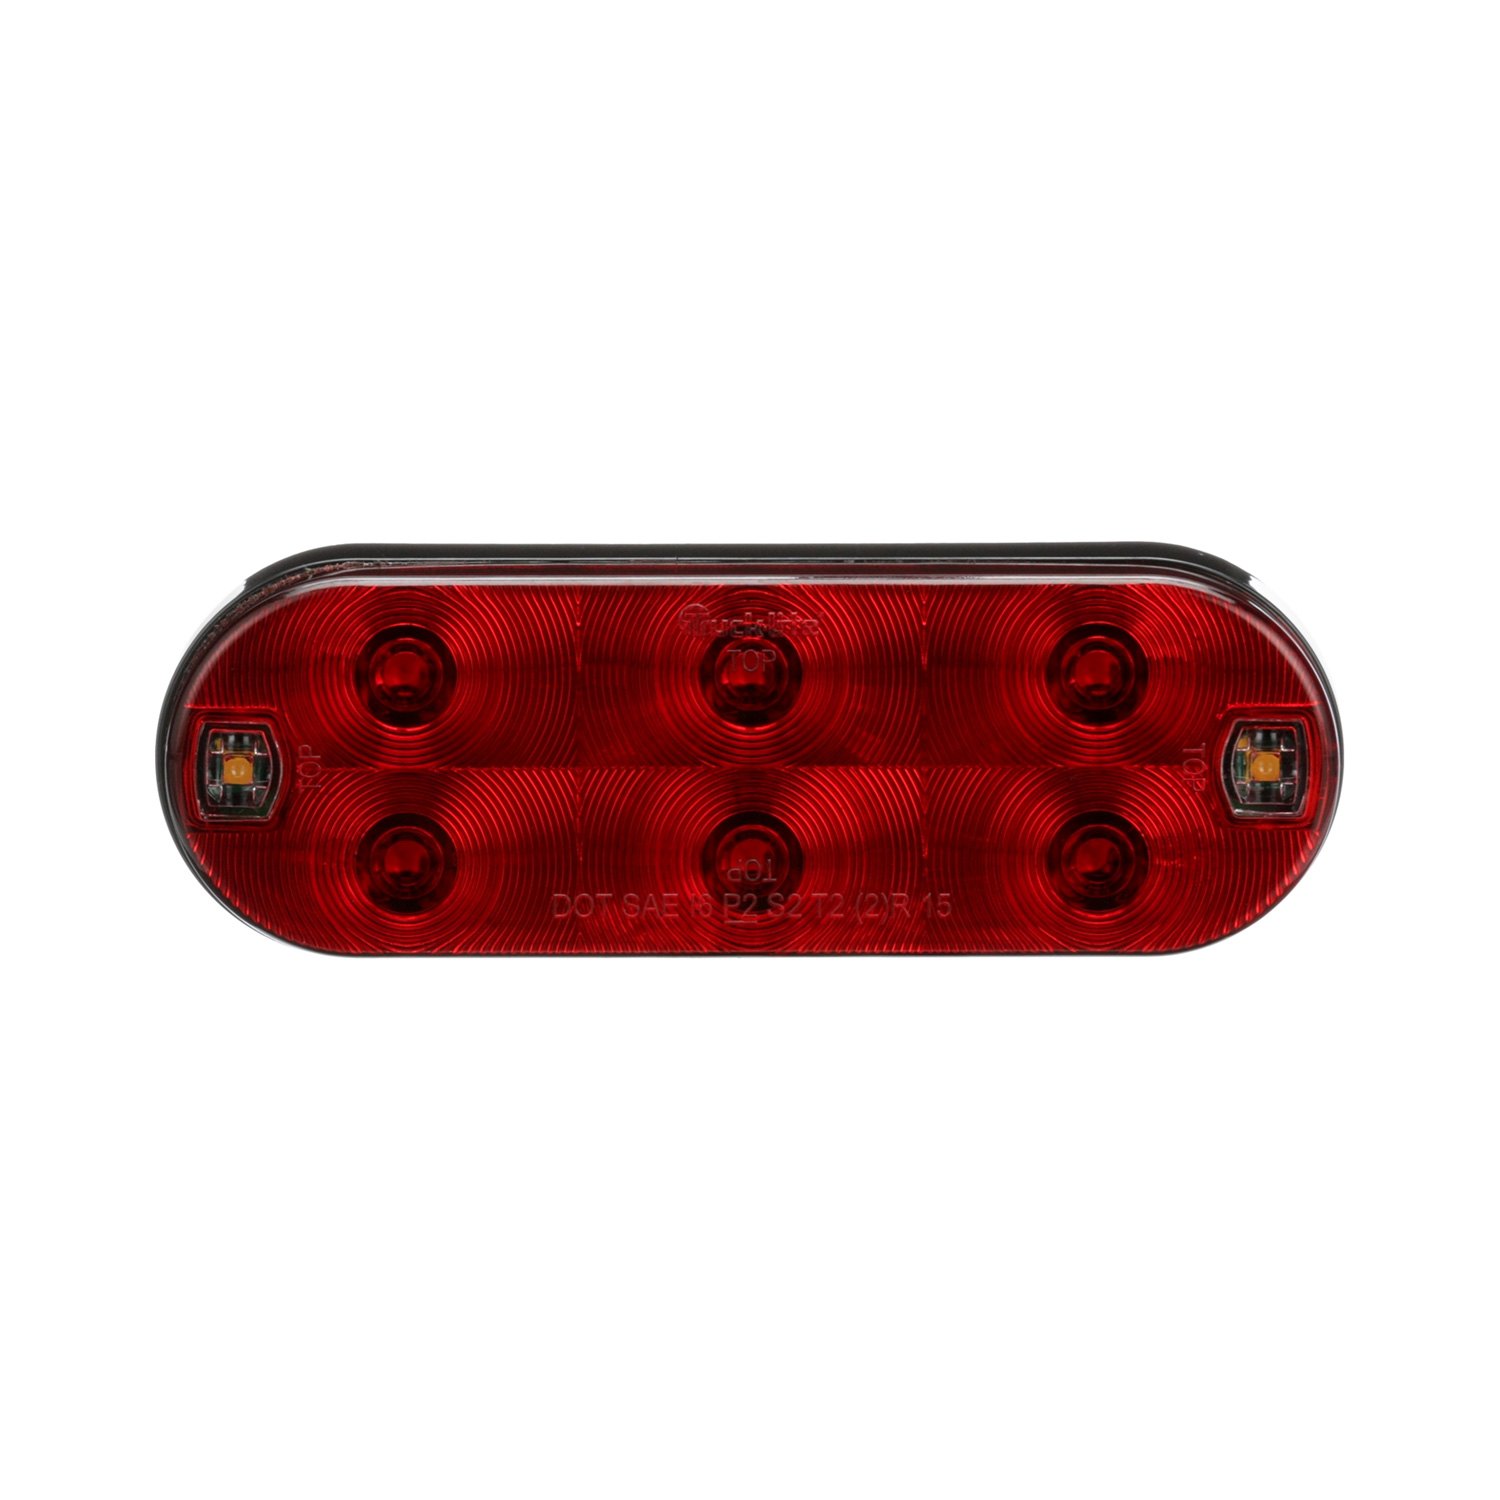 6 piece Truck-Lite 4/" LED Fit /'N Forget M//C Adapter